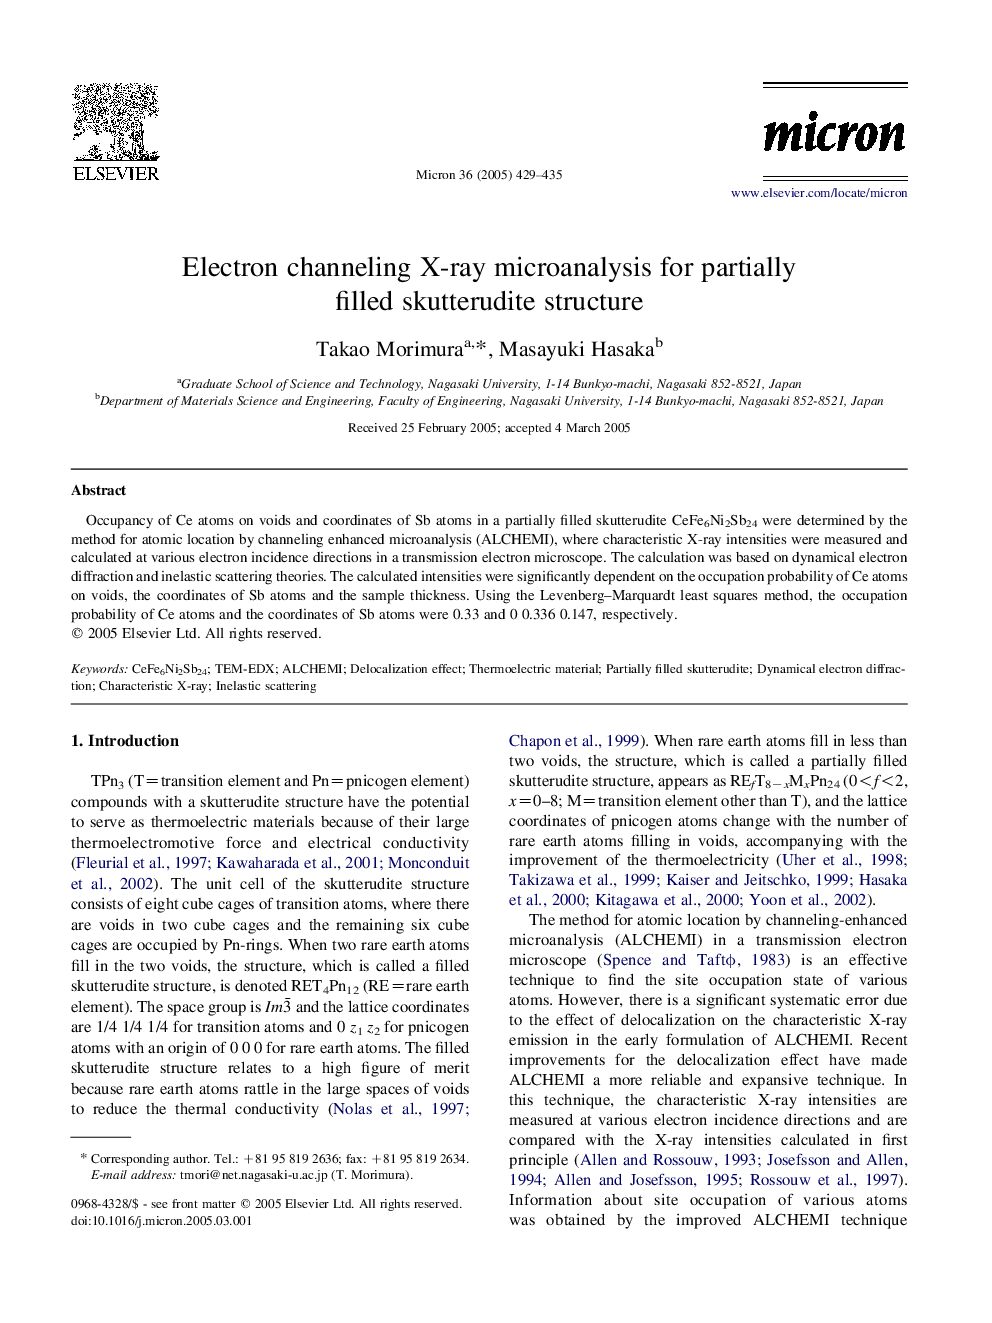 Electron channeling X-ray microanalysis for partially filled skutterudite structure